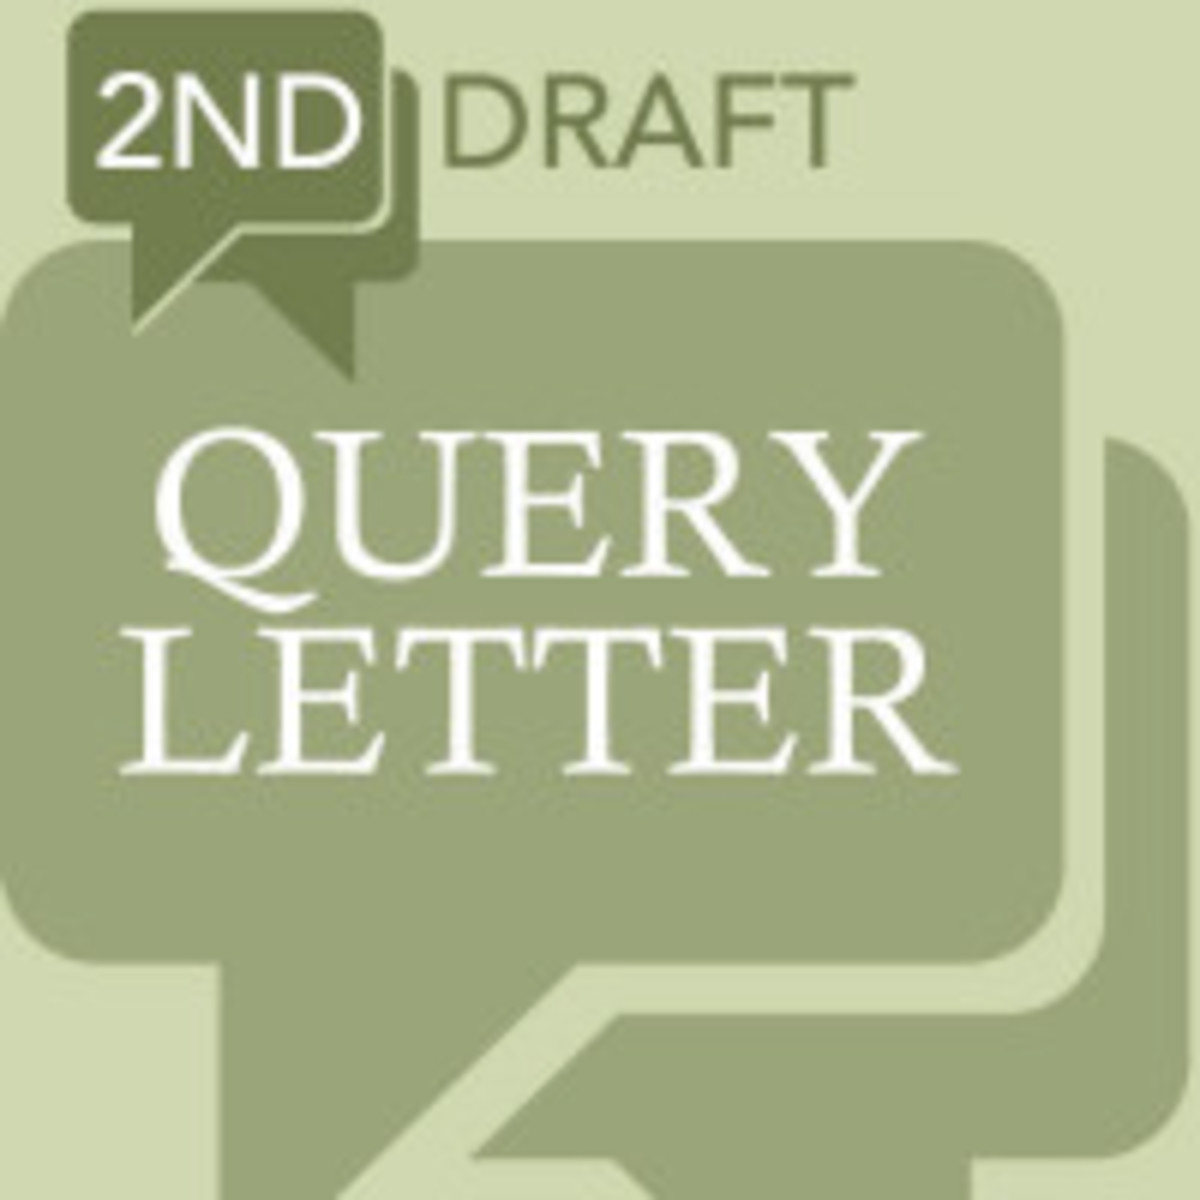 Whether you are an experienced writer looking to improve the elements within your query letter or a new writer looking for pointers on how to write a query letter, our 2nd Draft Query Letter Critique Service provides the advice and feedback you need to improve your query.